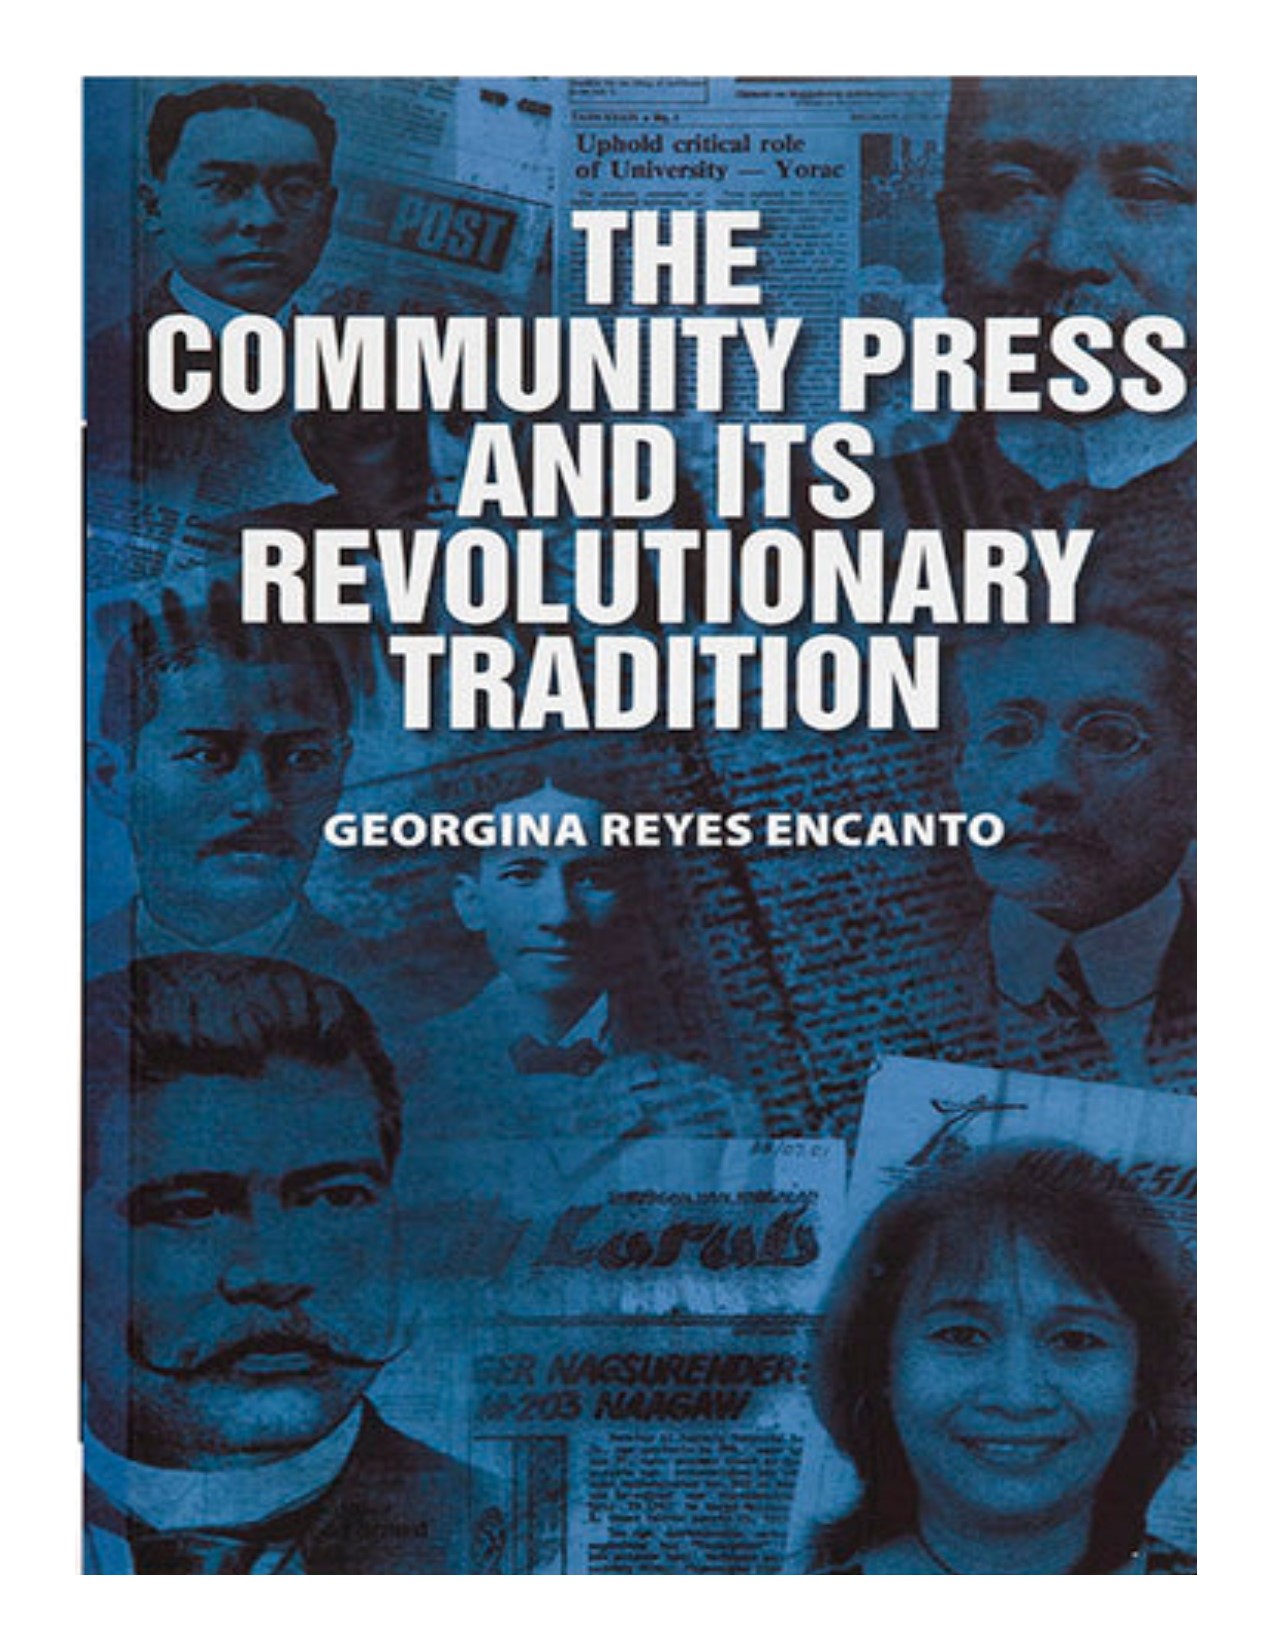 The community press and its revolutionary tradition